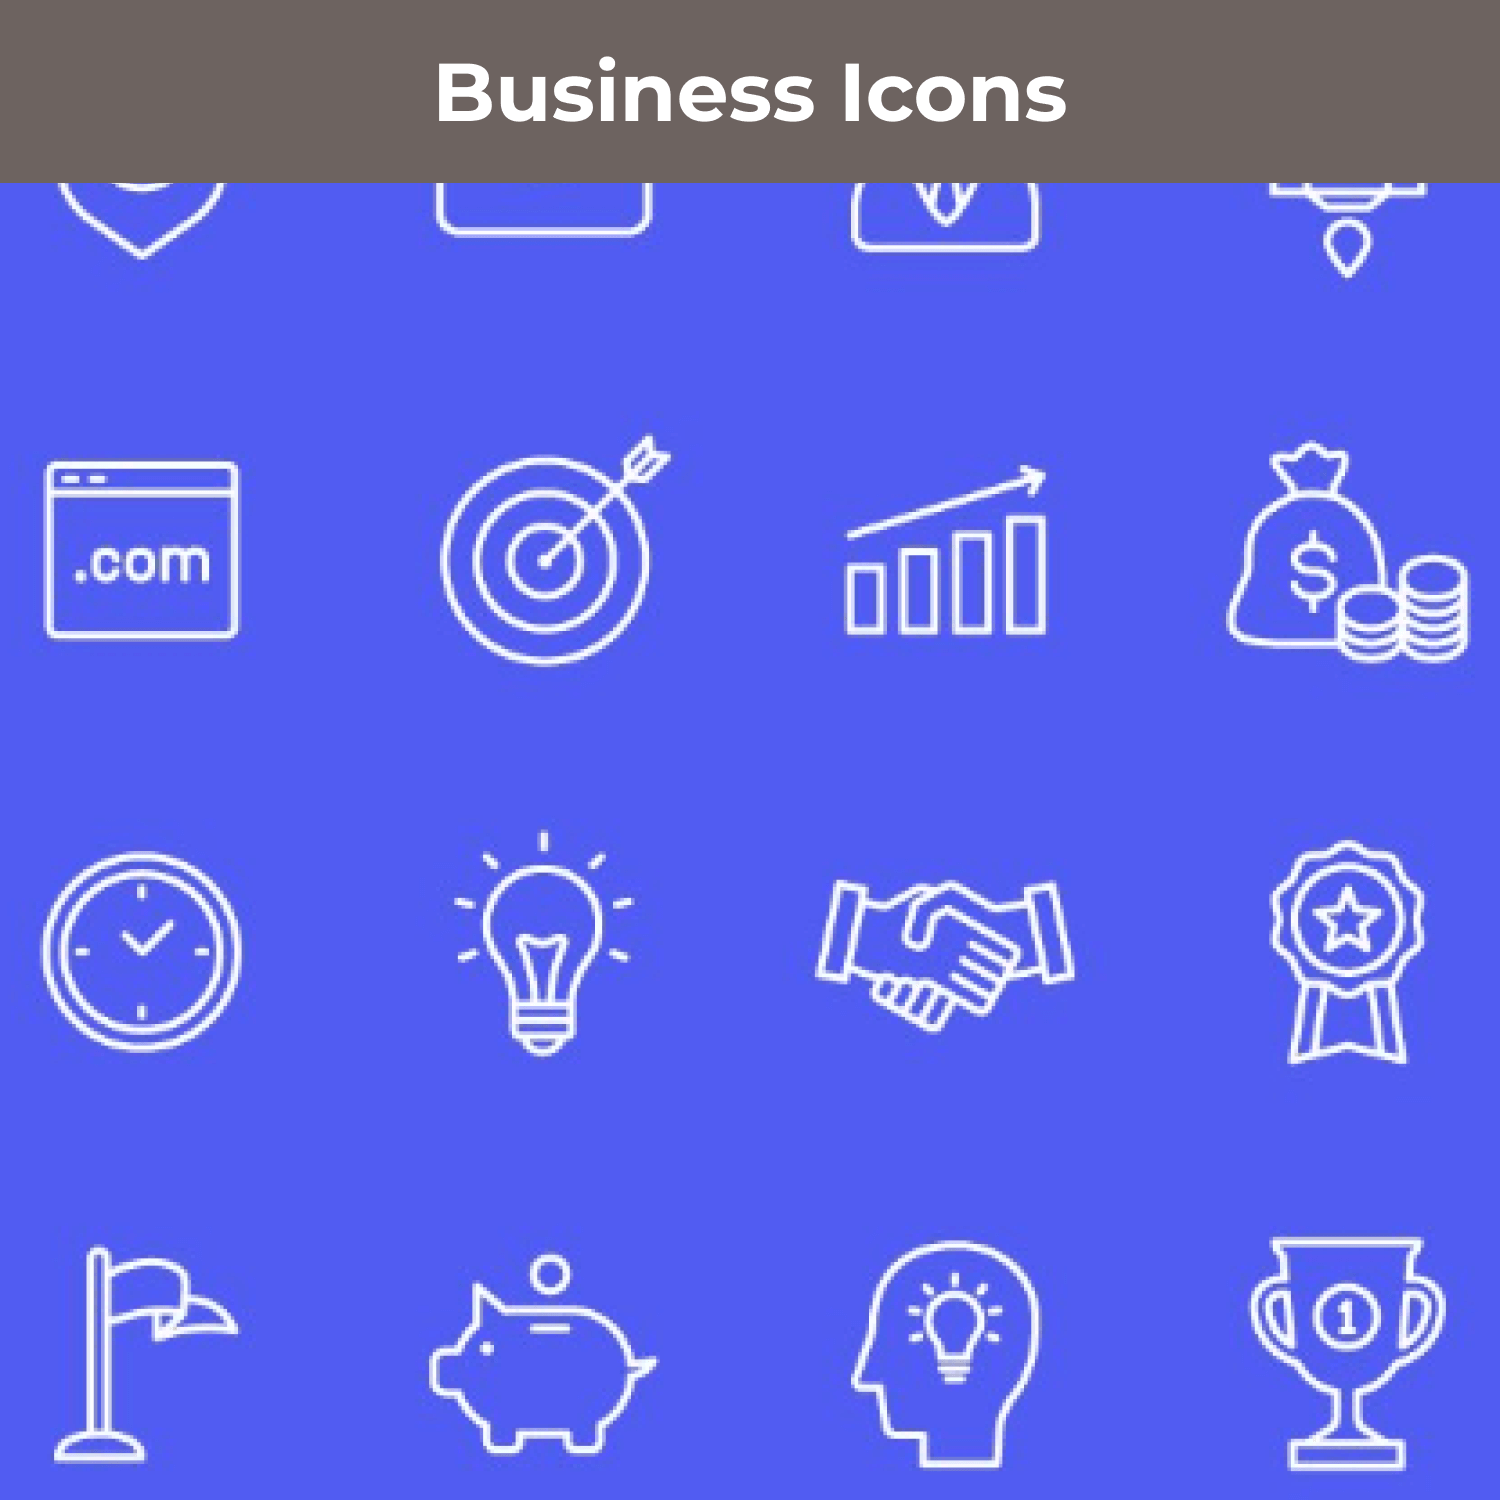 Business Icons on blue background.